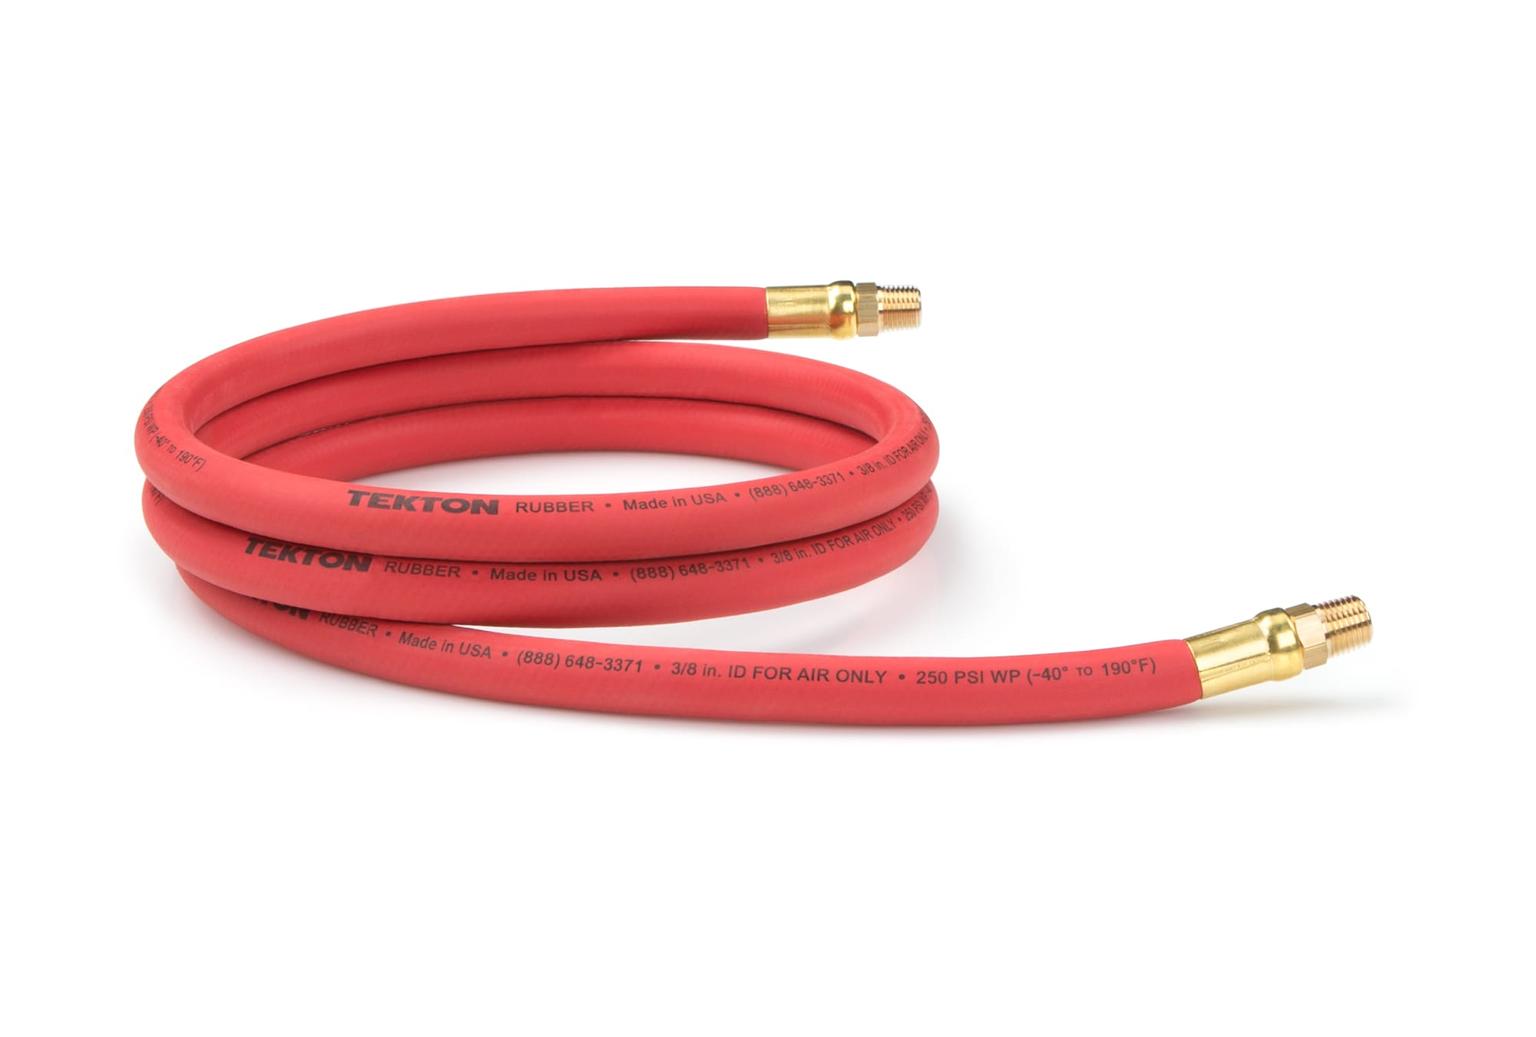 TEKTON 46333-S 3/8 Inch I.D. x 6 Foot Rubber Lead-In Air Hose (250 PSI)